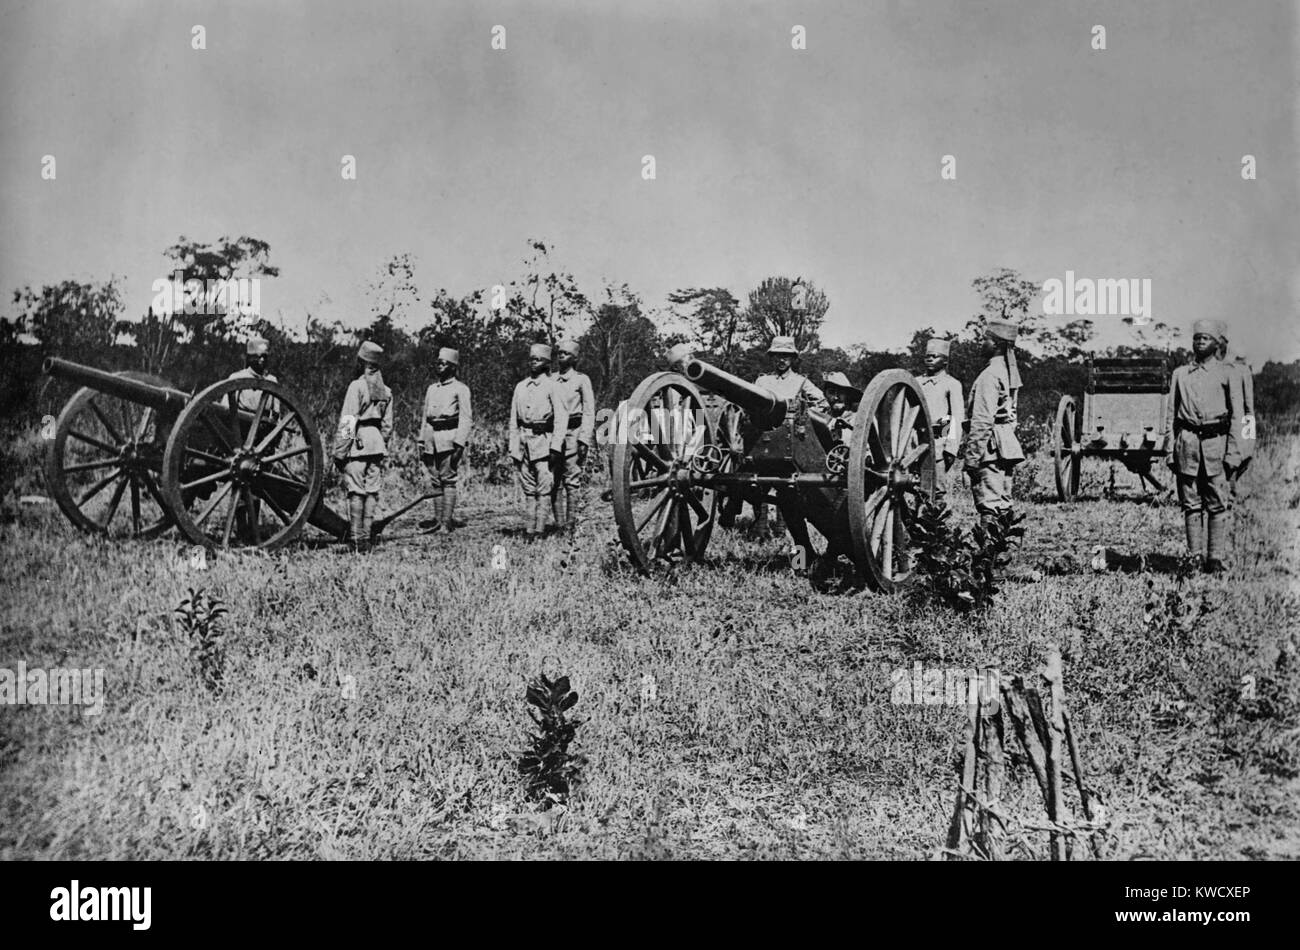 World War 1 in East Africa. German Askaris (native soldiers) posing at attention with artillery. Manning the gun on the left are two German officers. Ca. 1915-18. (BSLOC 2013 1 39) Stock Photo